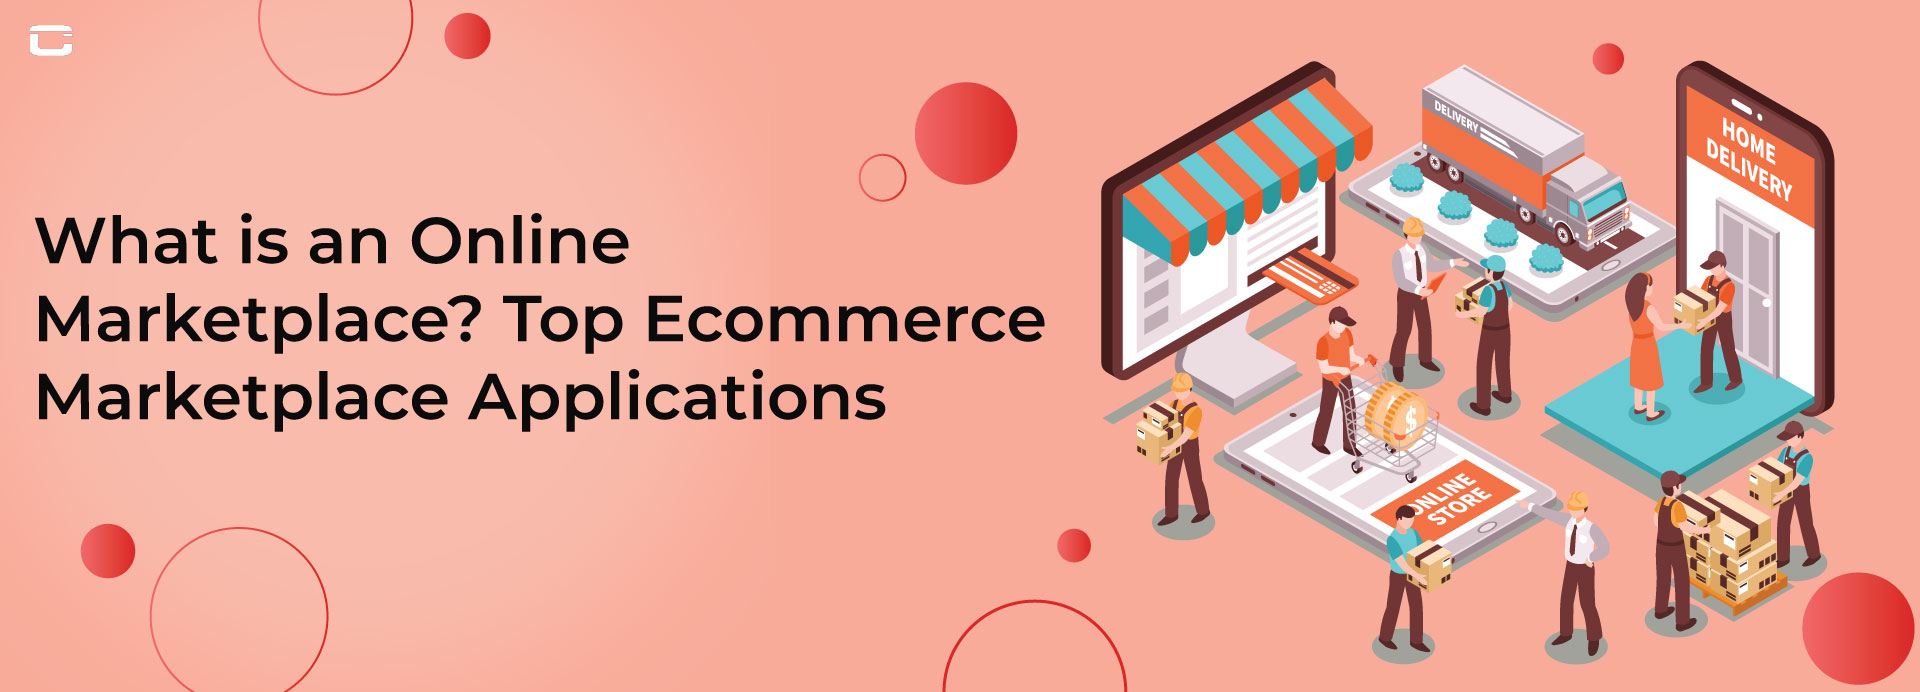 What is an Online Marketplace? Top Ecommerce Marketplace Applications